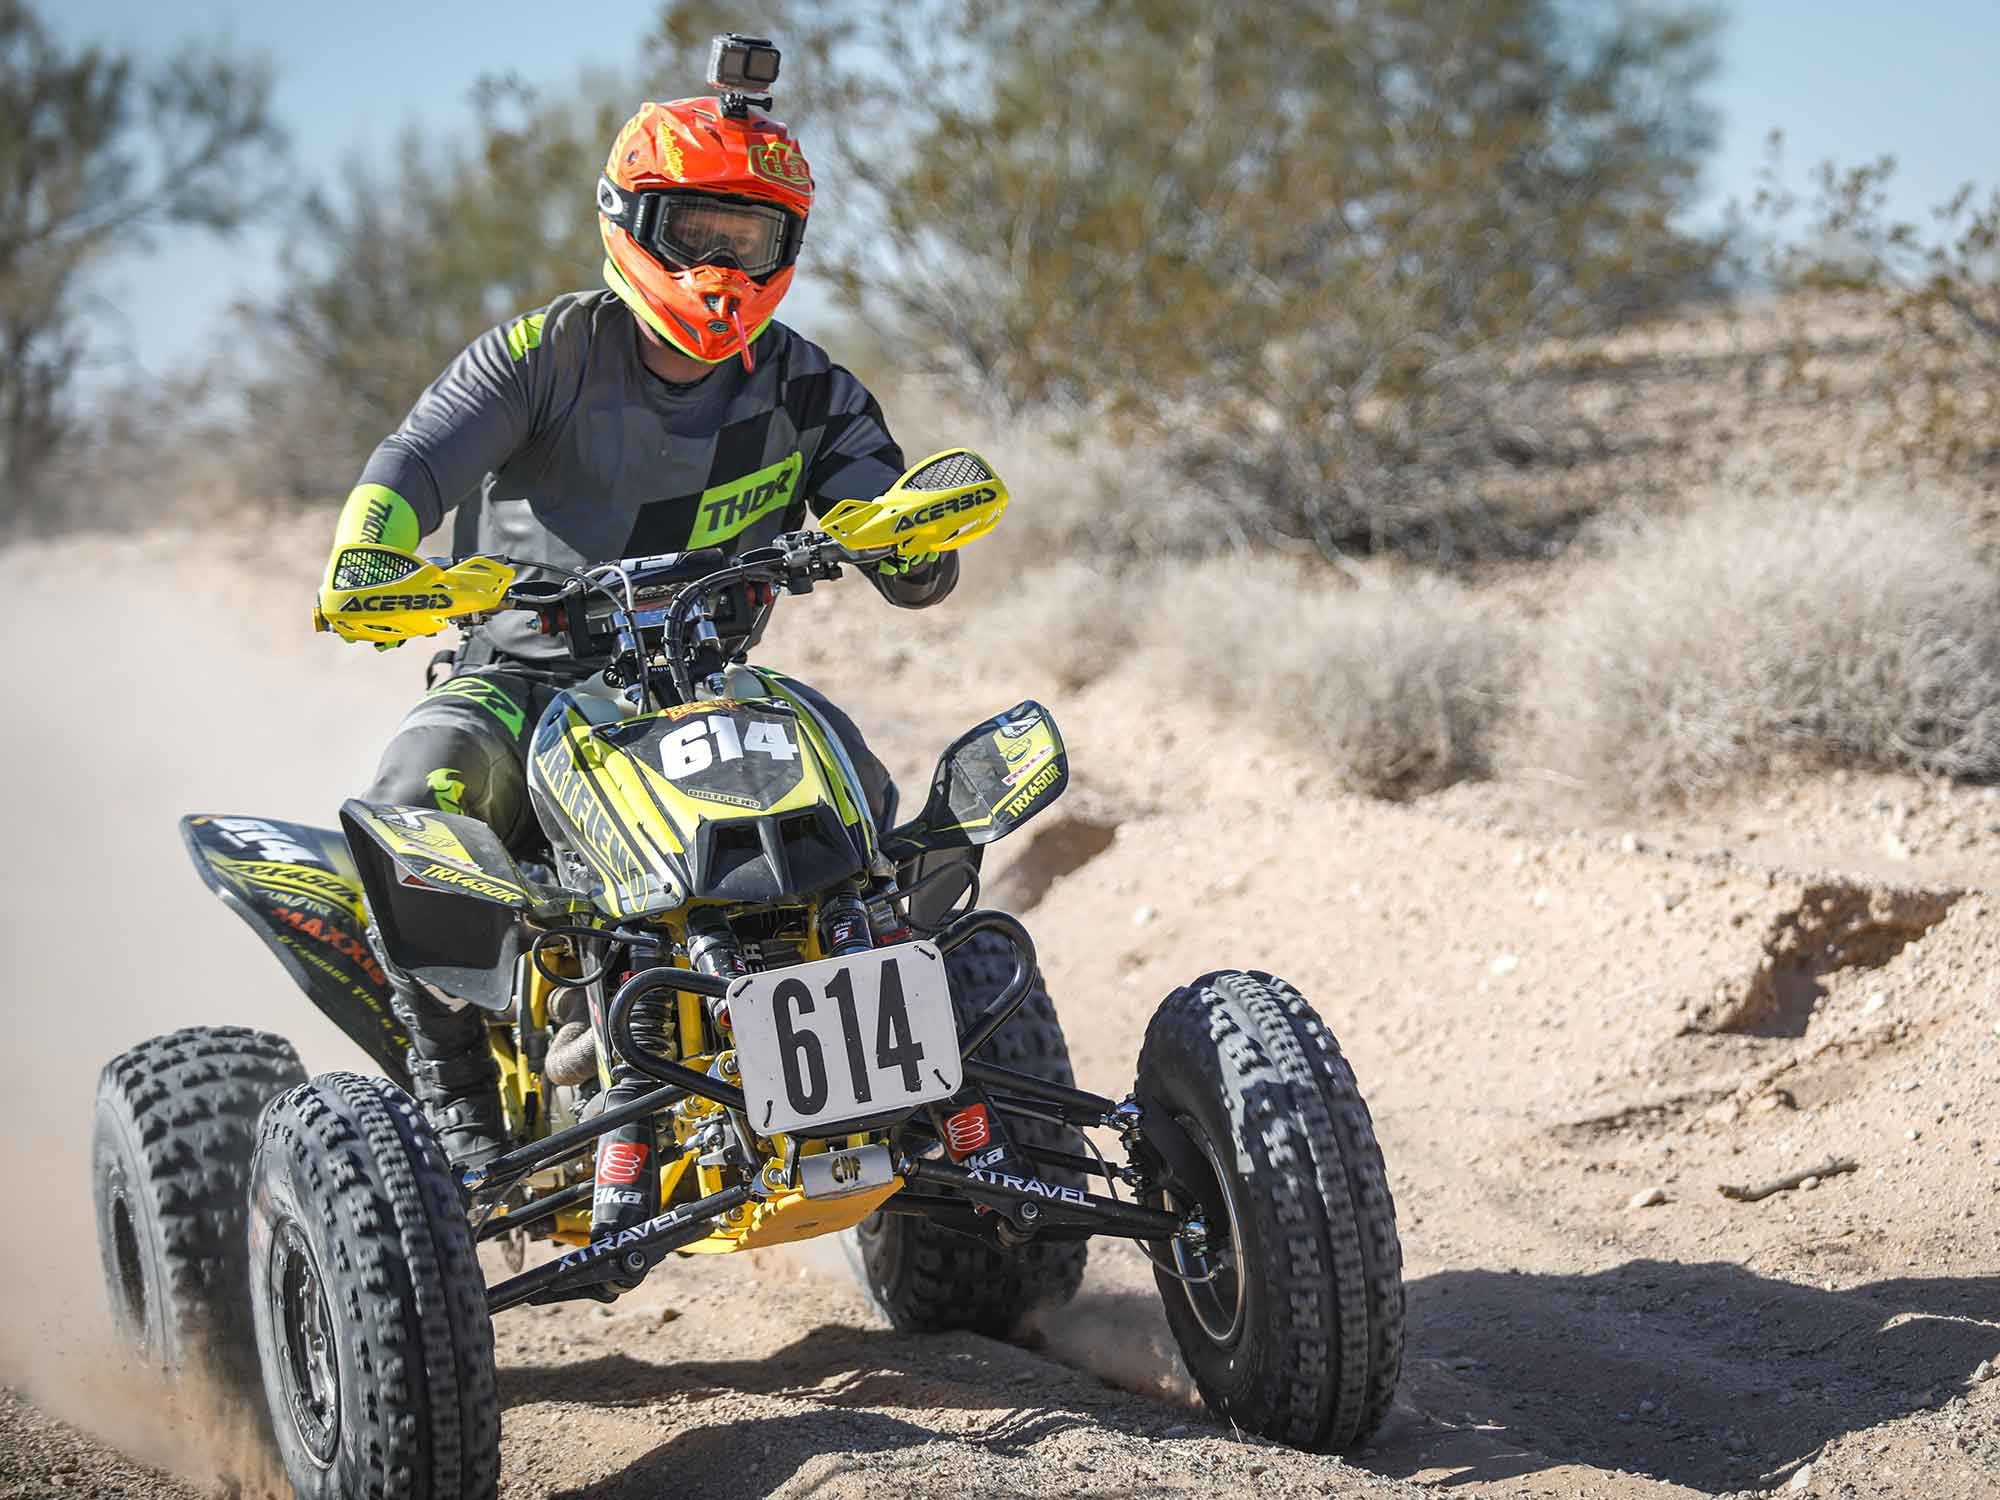 Kyle Standage took the Expert Ironman class win on the No. 614 2005 Honda TRX450R.